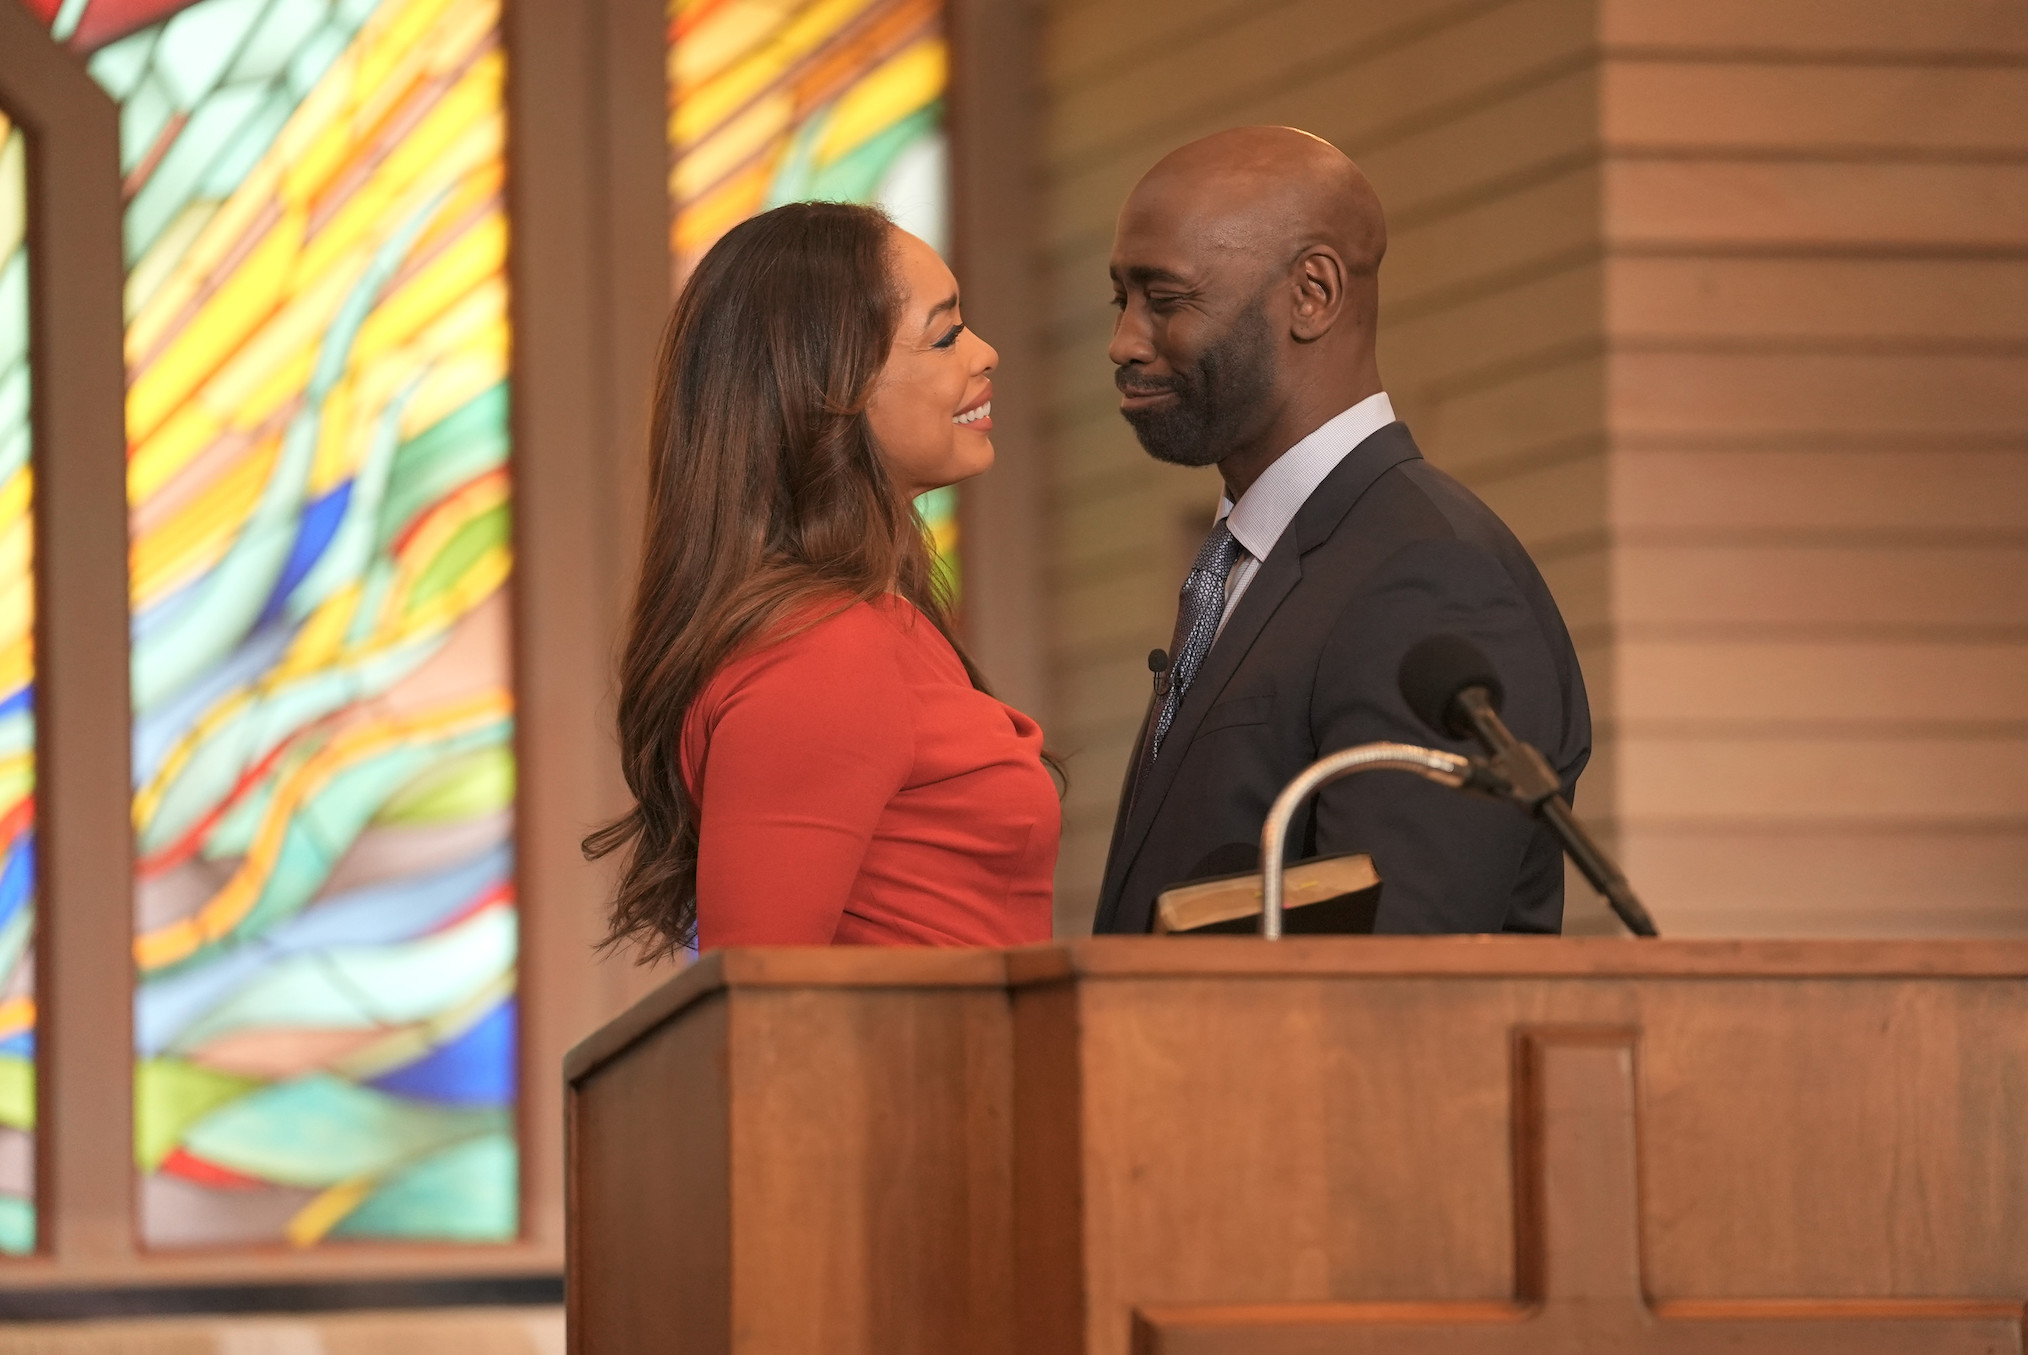 Gina Torres and D.B. Woodside in '9-1-1: Lone Star'